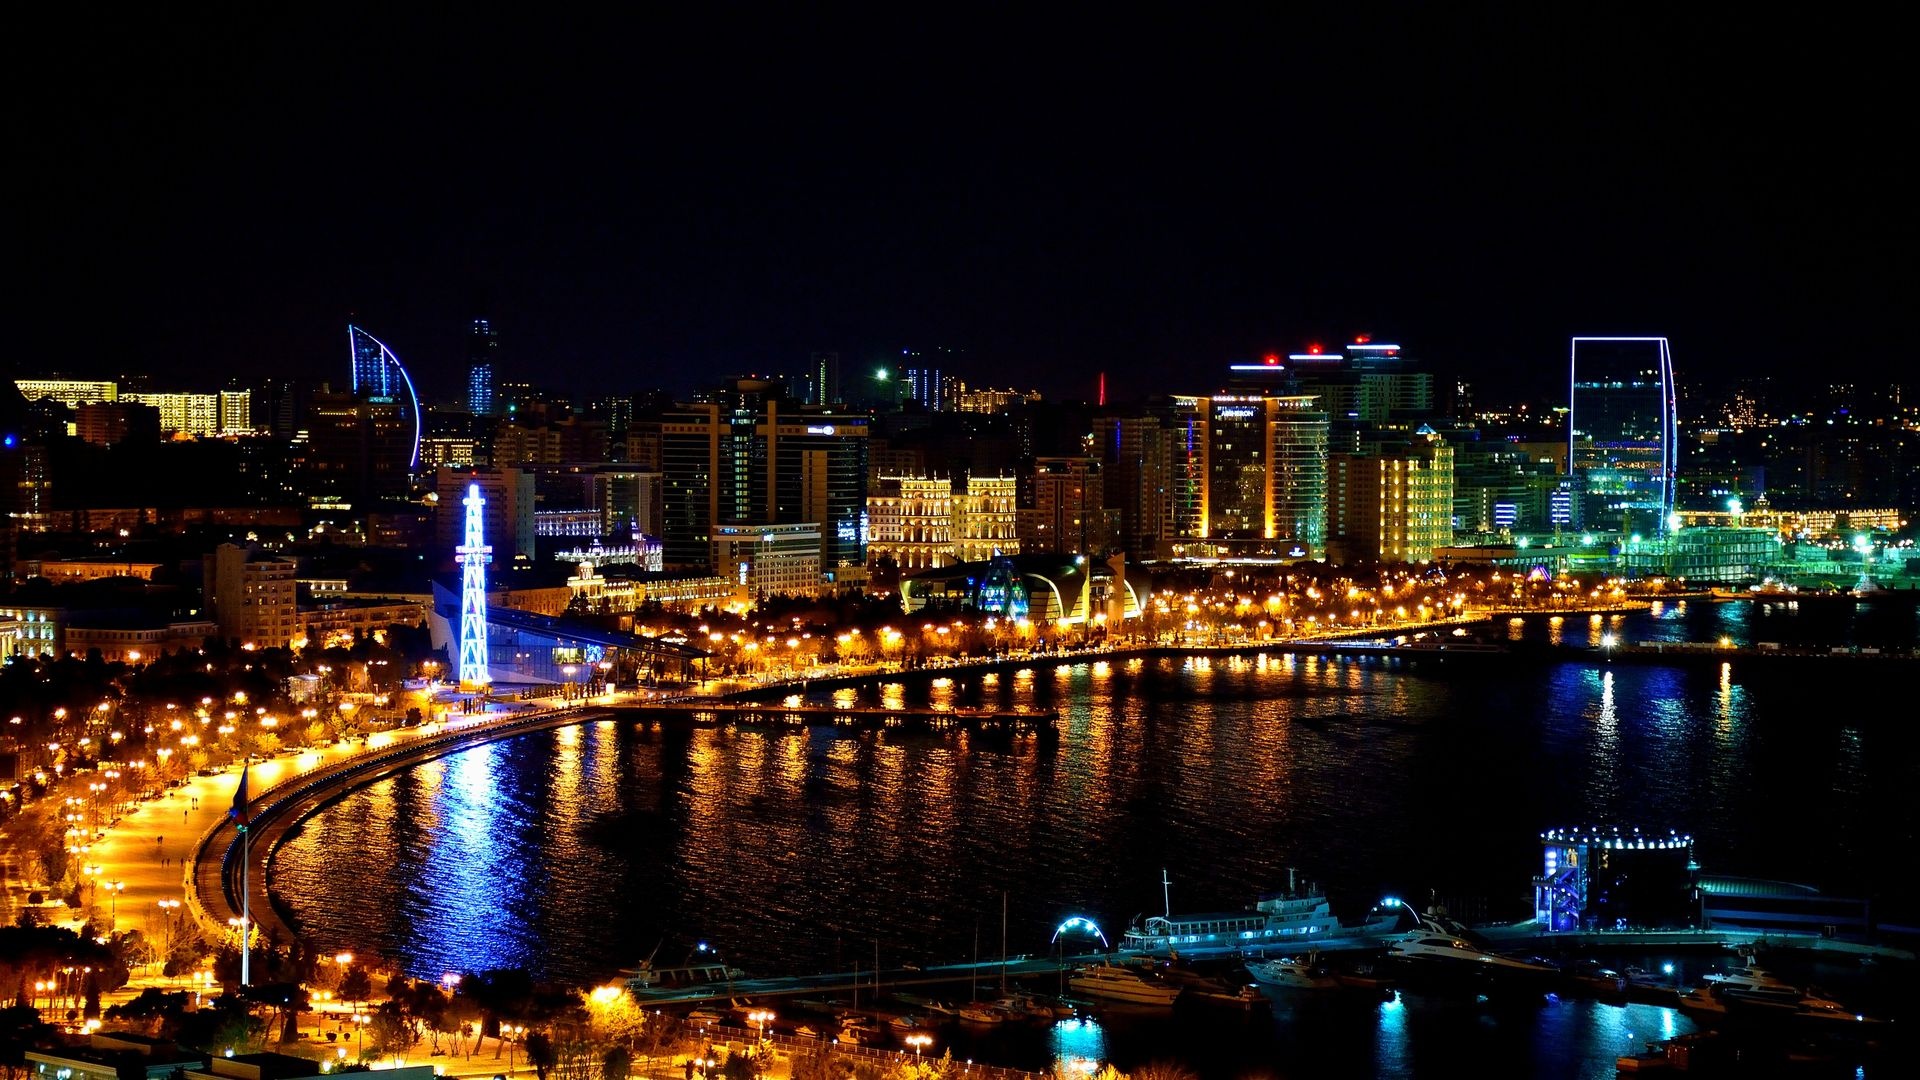 Azerbaijan: The largest country in the South Caucasus, City lights. 1920x1080 Full HD Wallpaper.